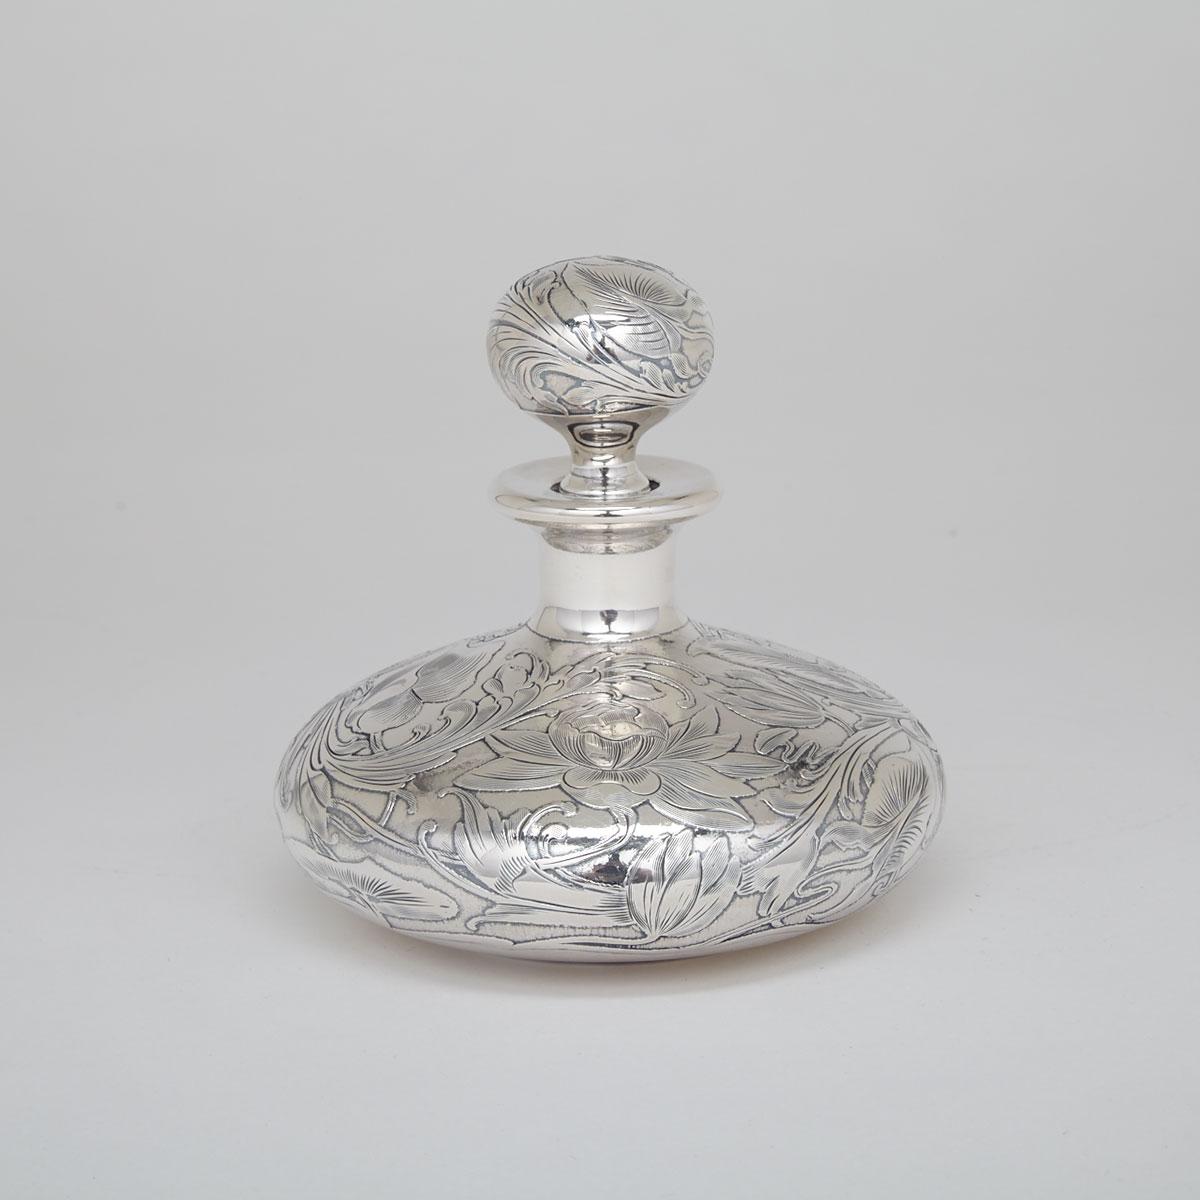 American Silver Overlaid Glass Toilet Water Bottle, c.1900